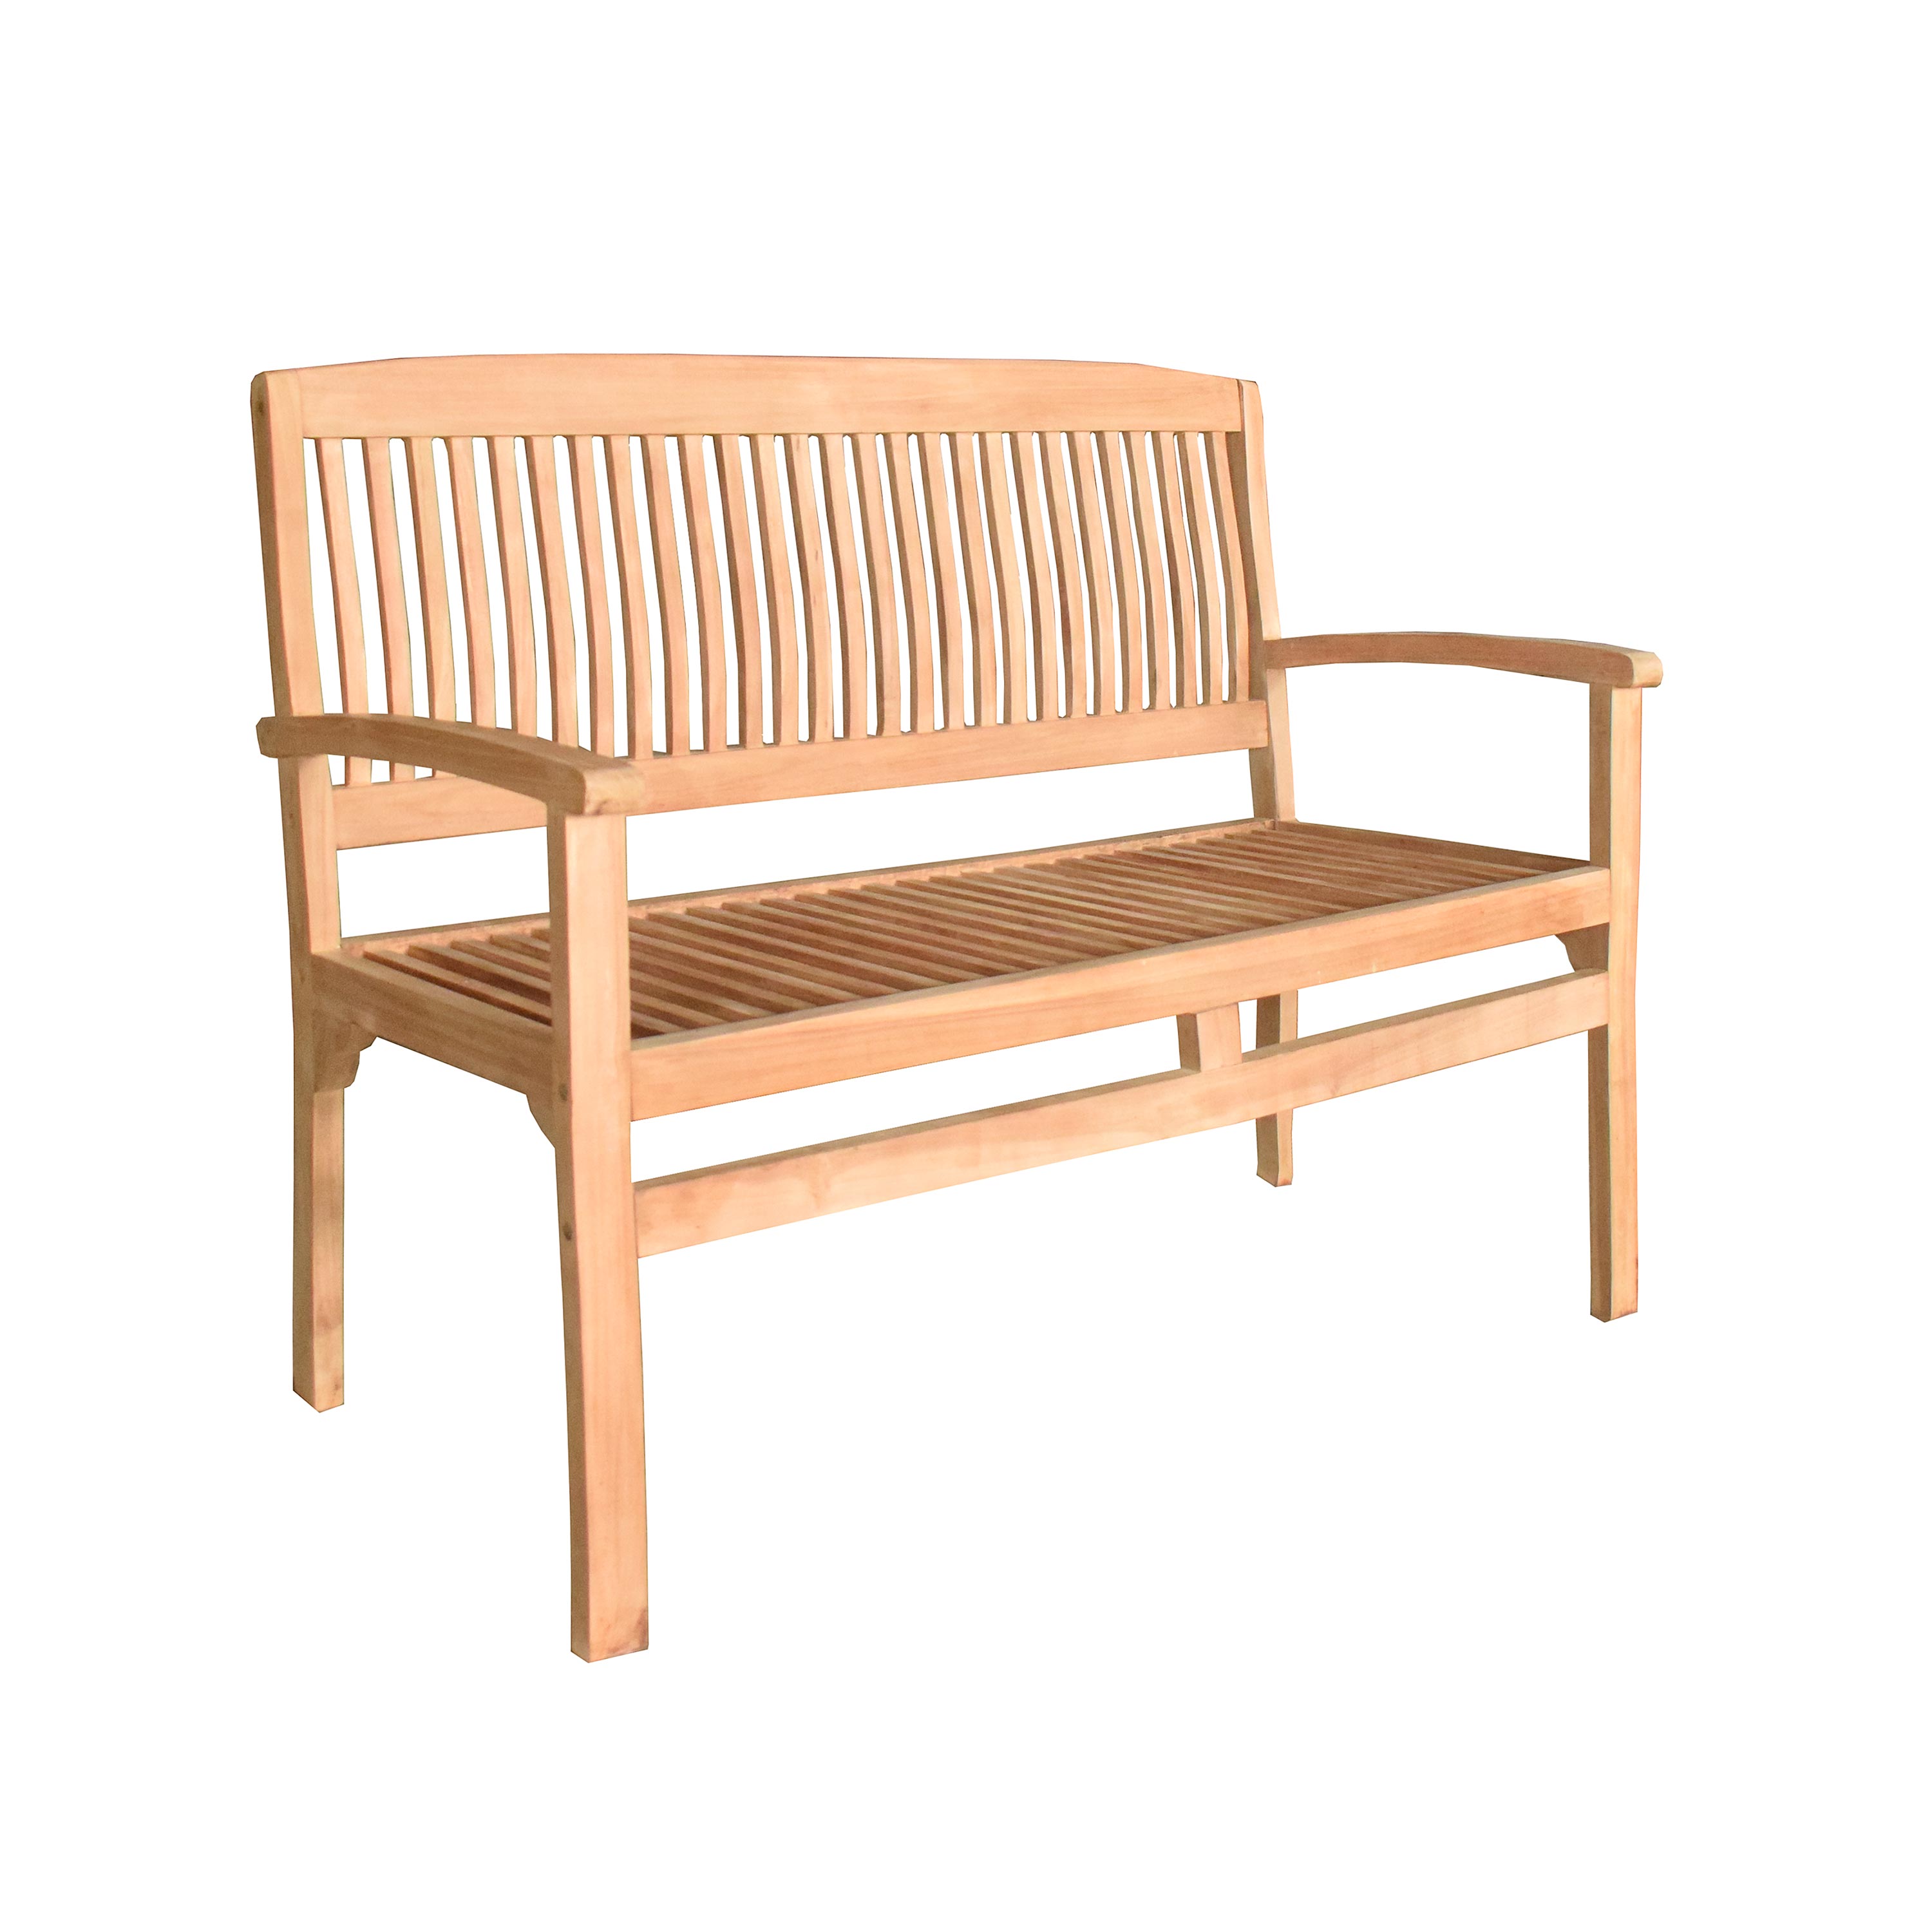 Teak Bench With Arm Rests